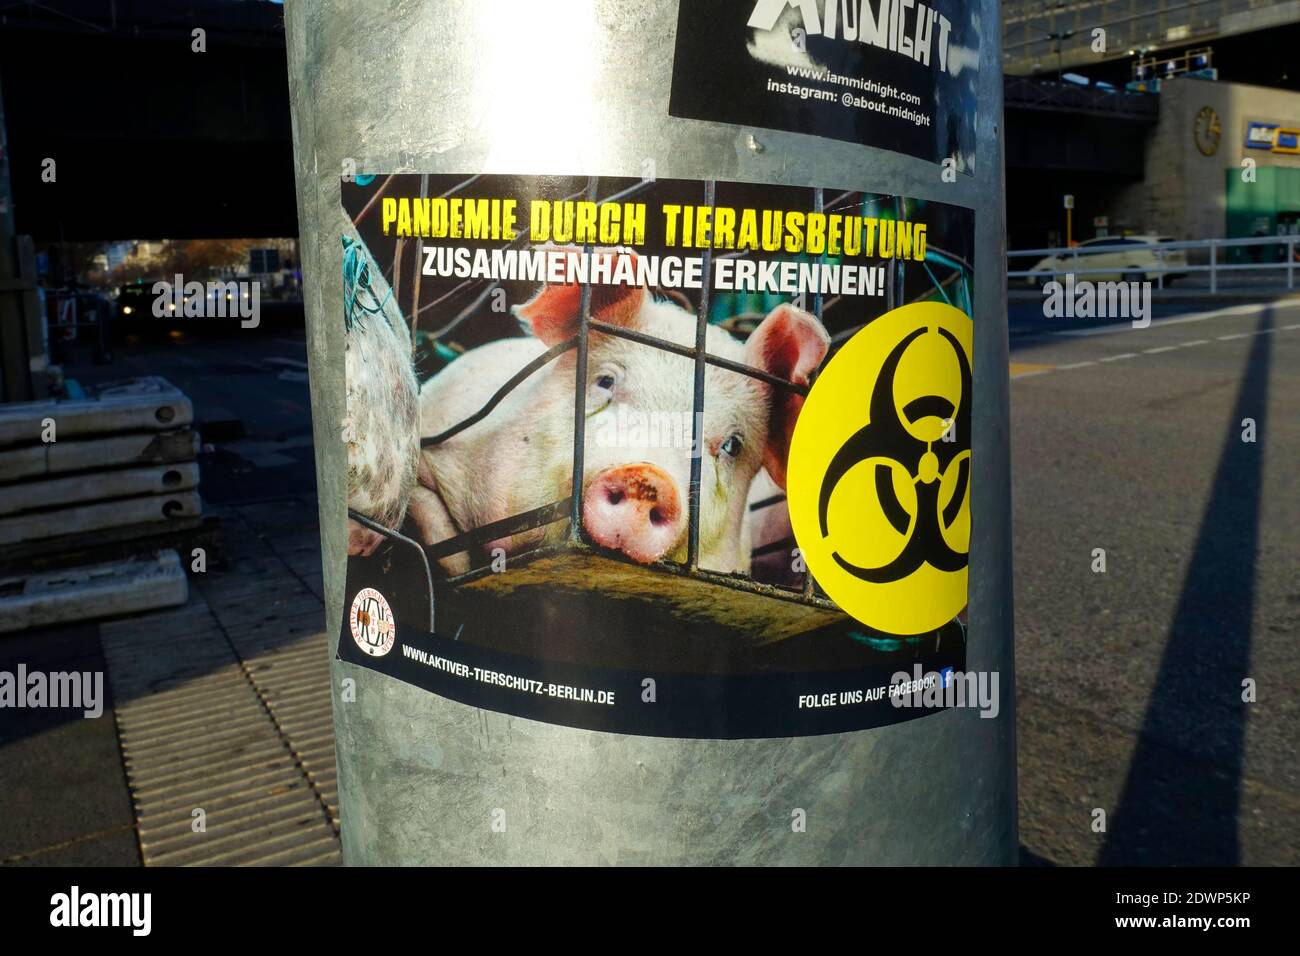 Sticker, pandemic through animal exploitation, recognizing connections, Berlin, Germany Stock Photo